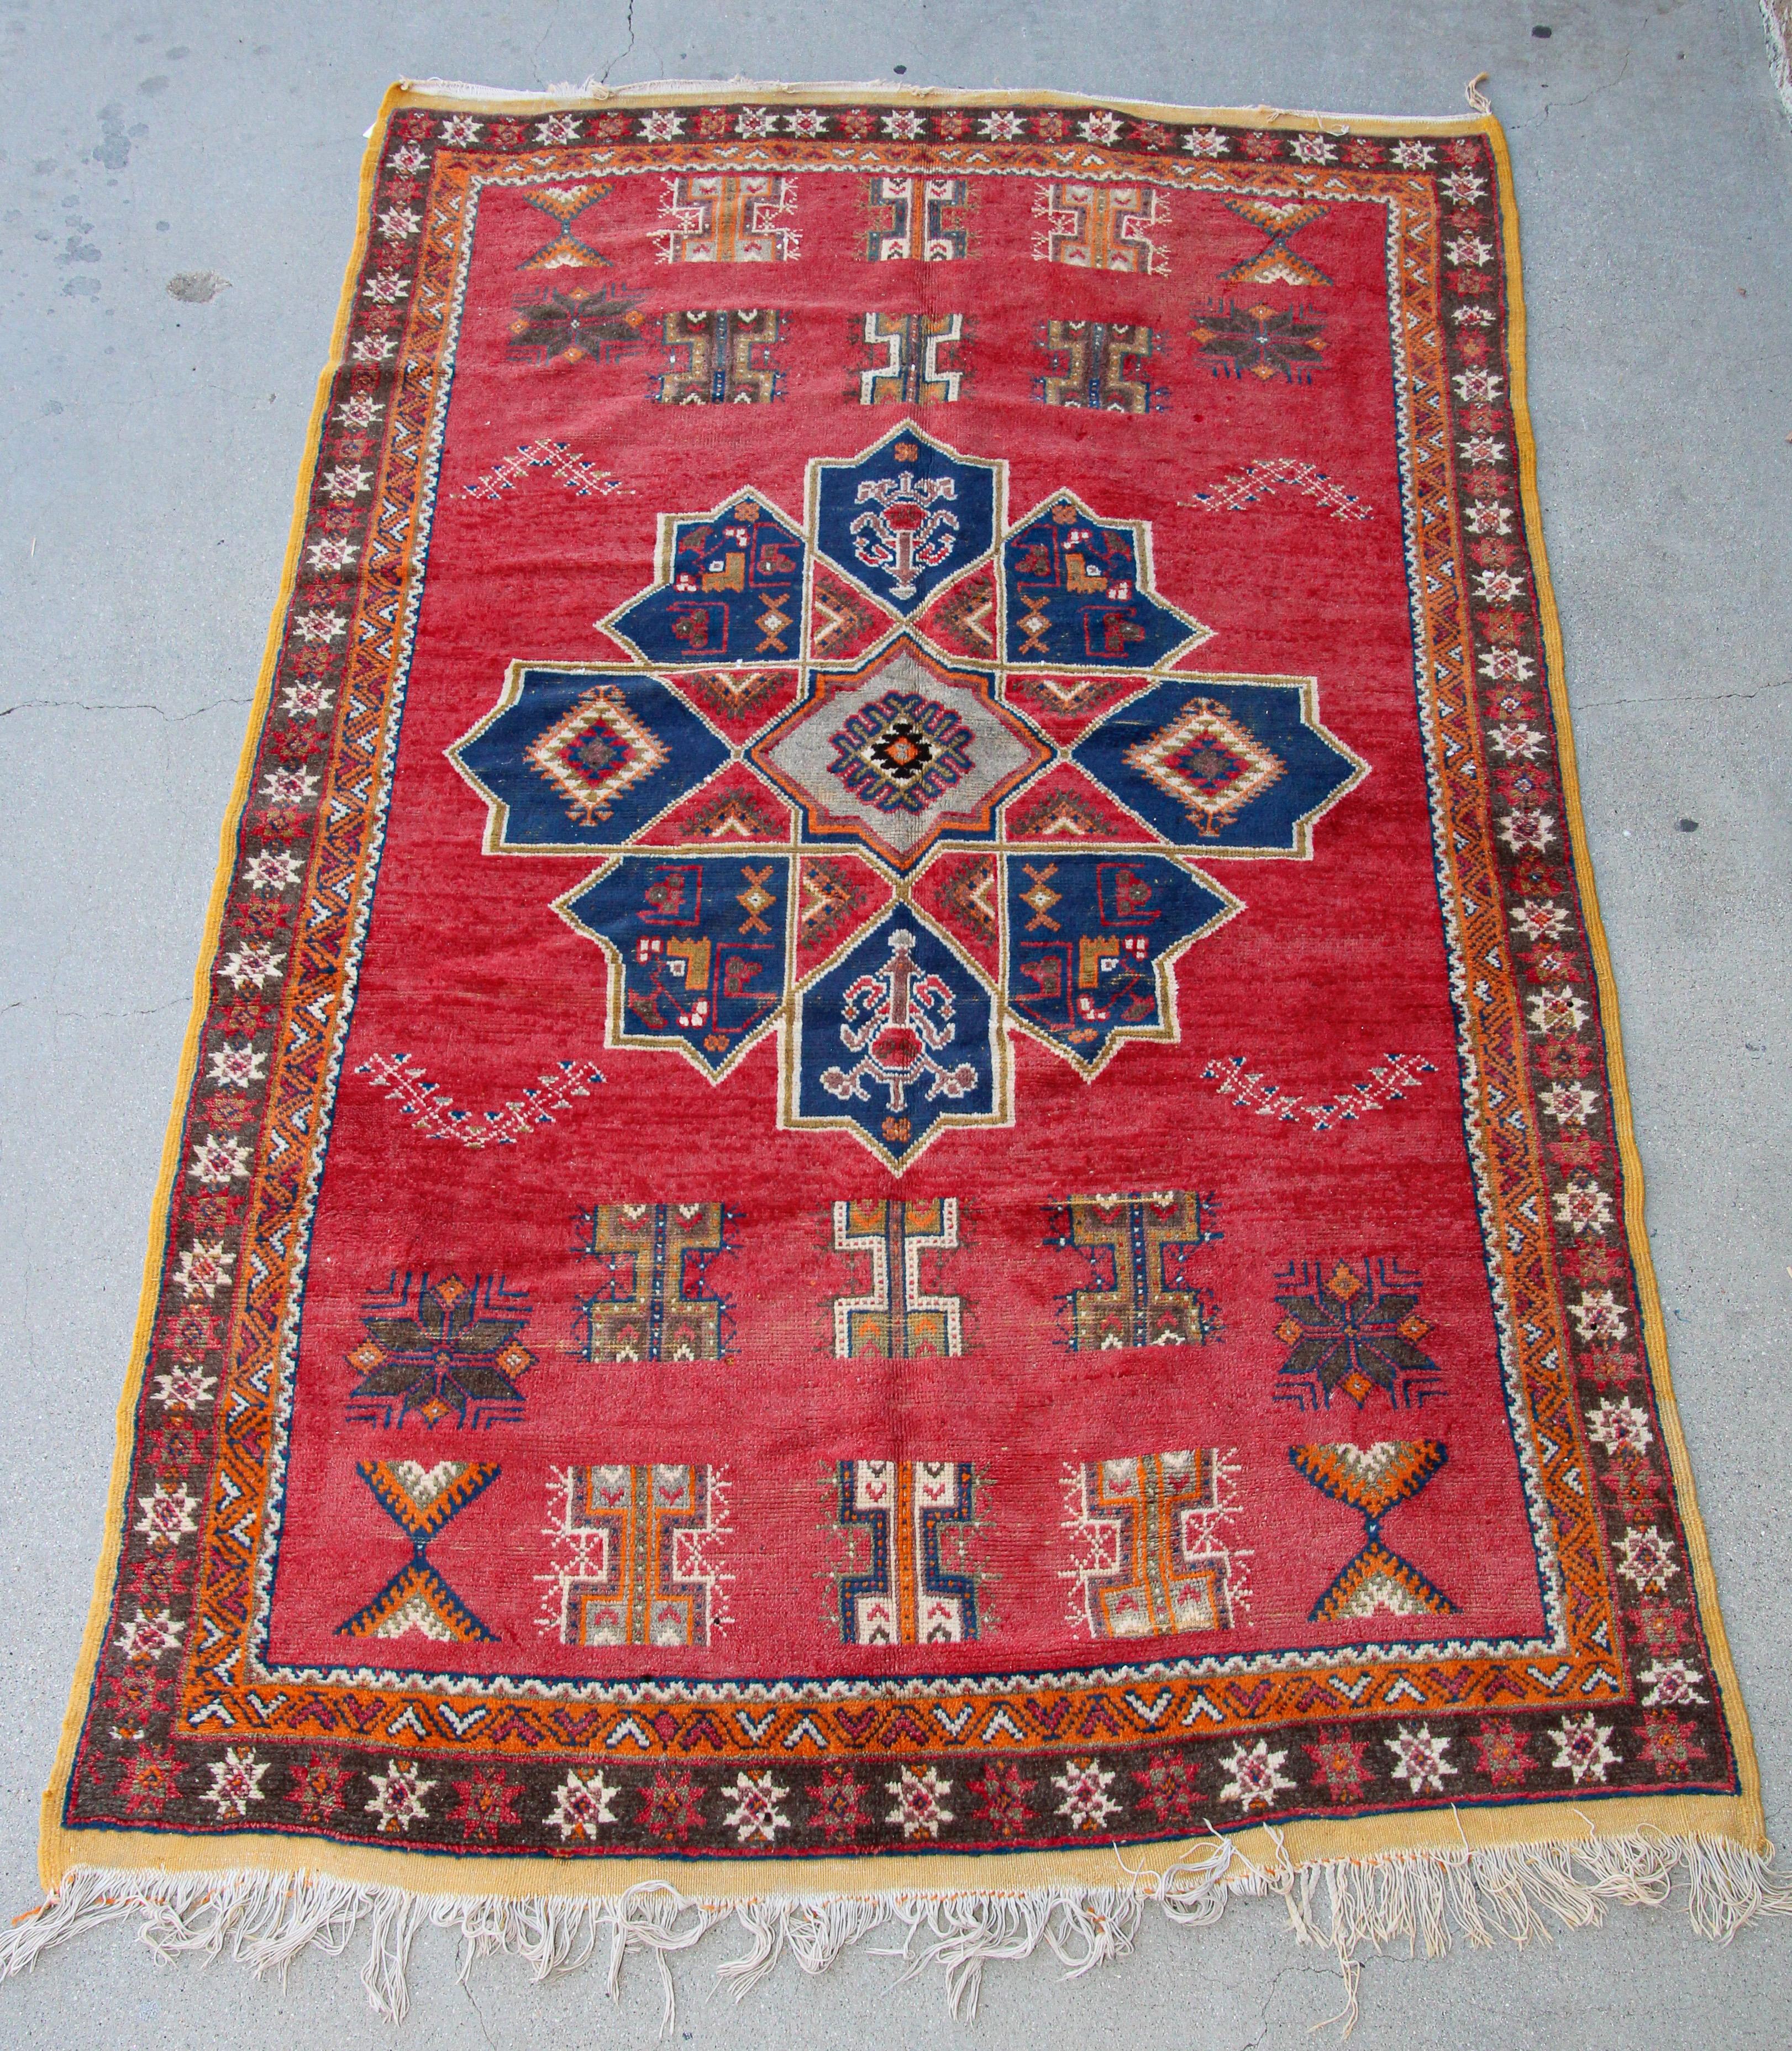 Moroccan vintage tribal rug handwoven by Berber Moroccan women using organic lamb wool and organic dye.
North African Moroccan tribal runner with low pile handwoven wool, hand-knotted by the Berber tribes of Morocco with traditional geometric